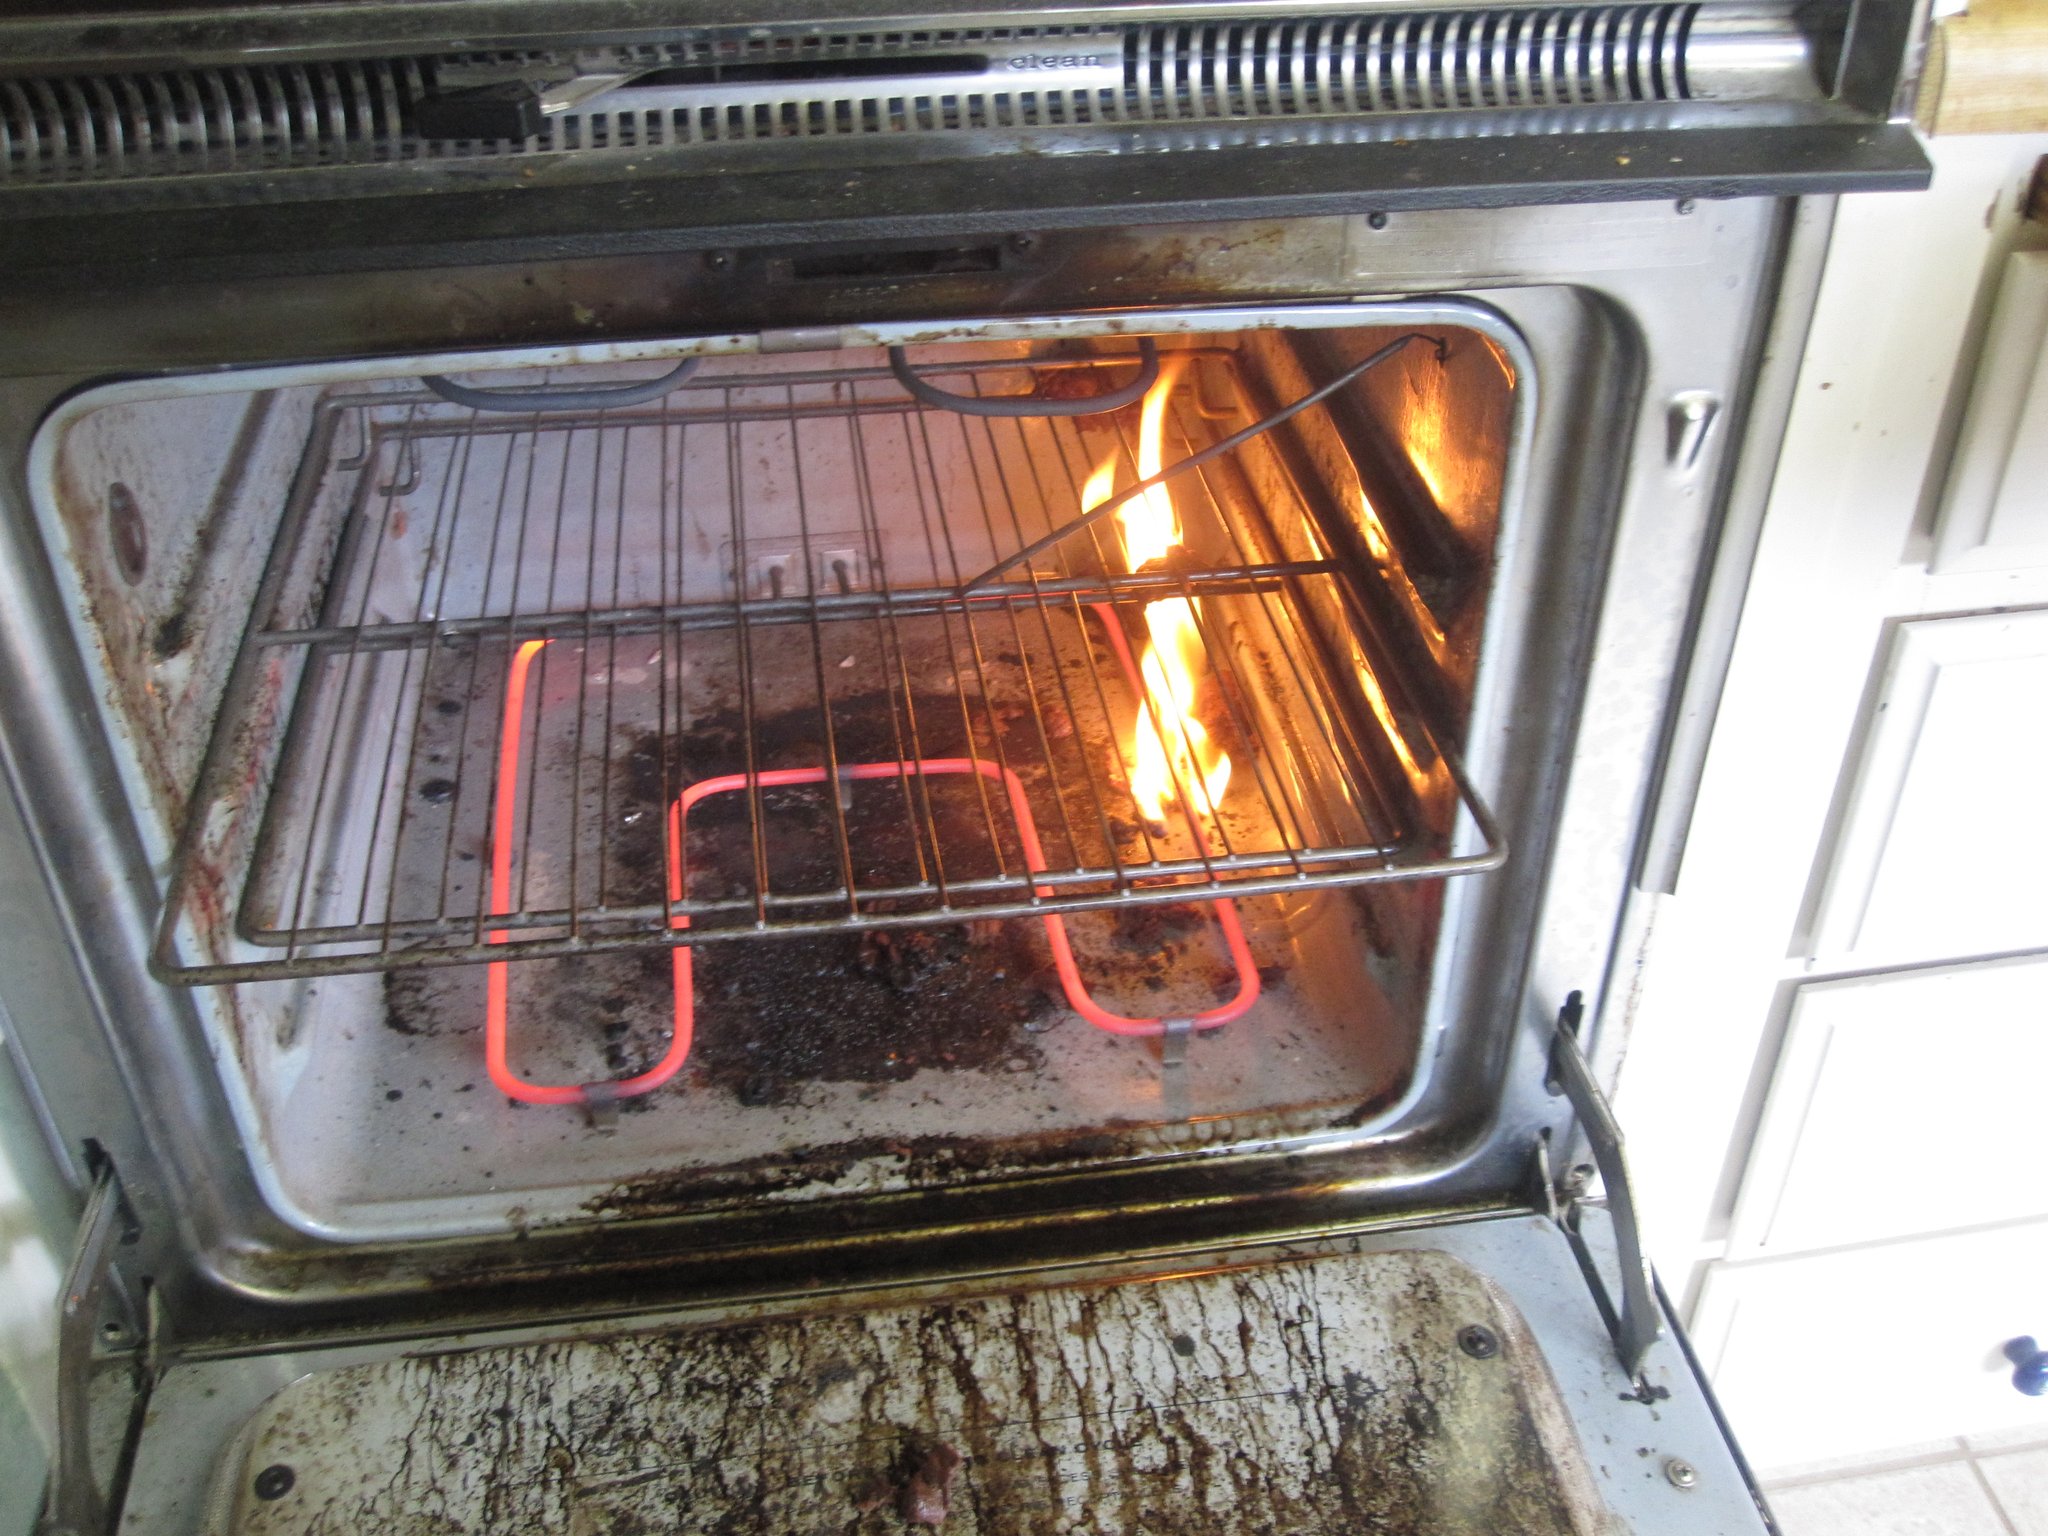 How to Put Out an Oven Fire | POPSUGAR Food